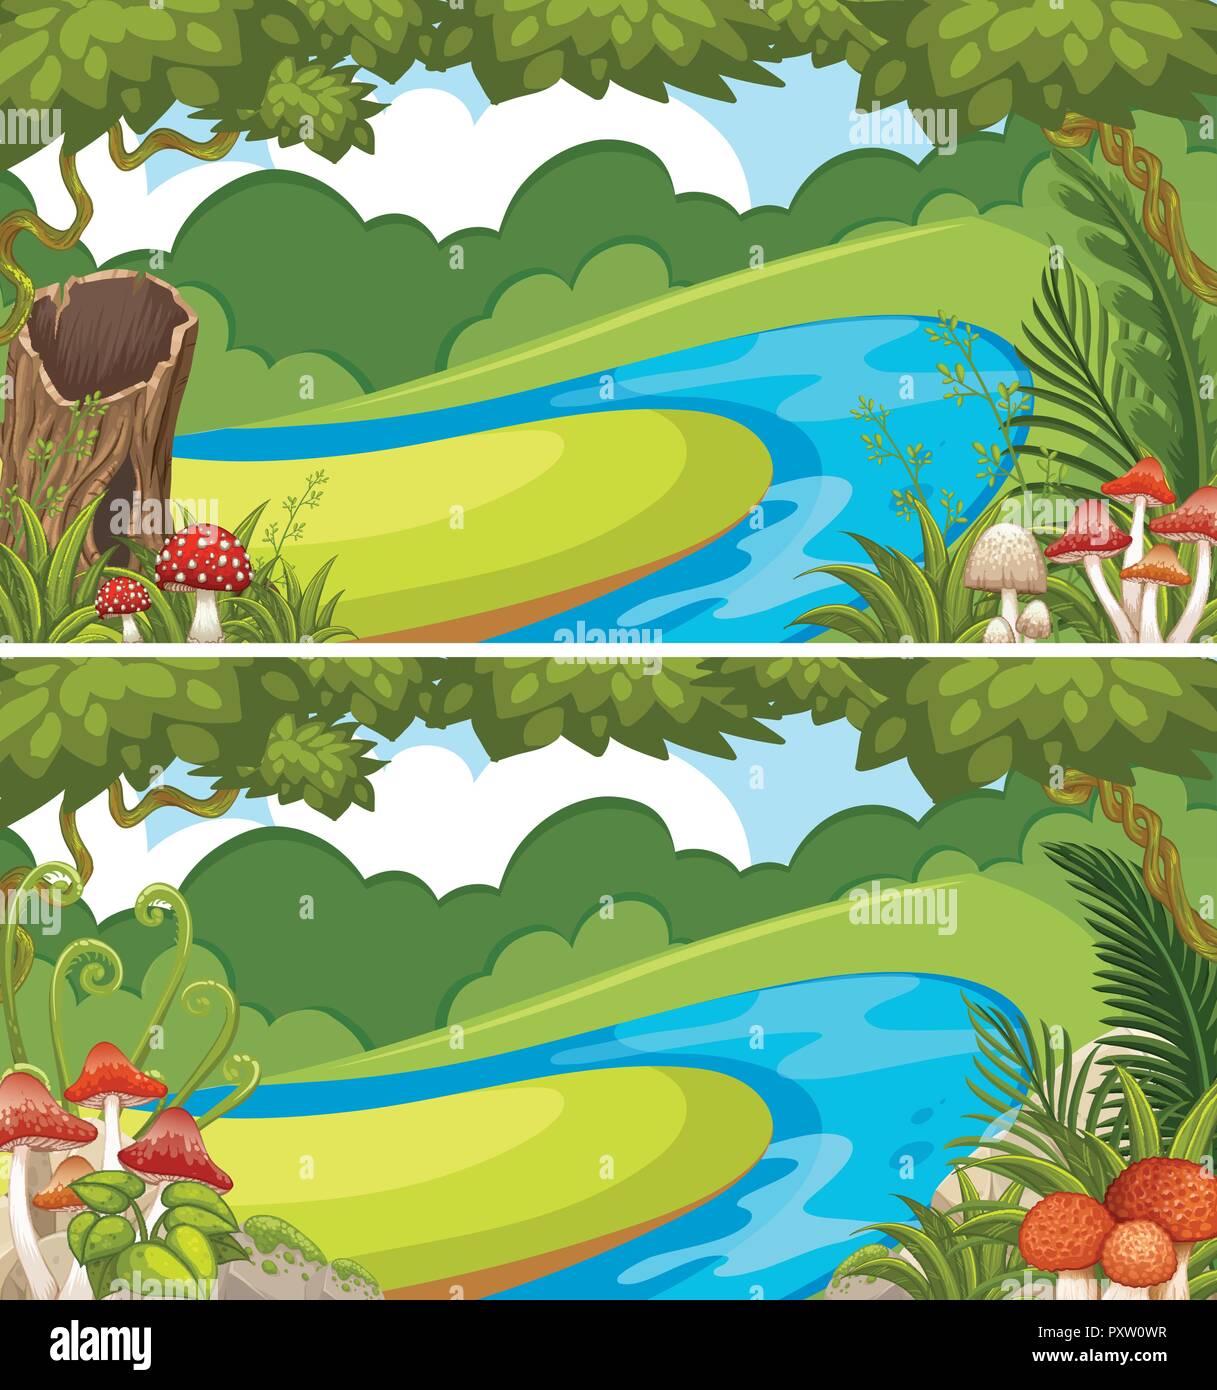 Two scenes with river in the forest illustration Stock Vector